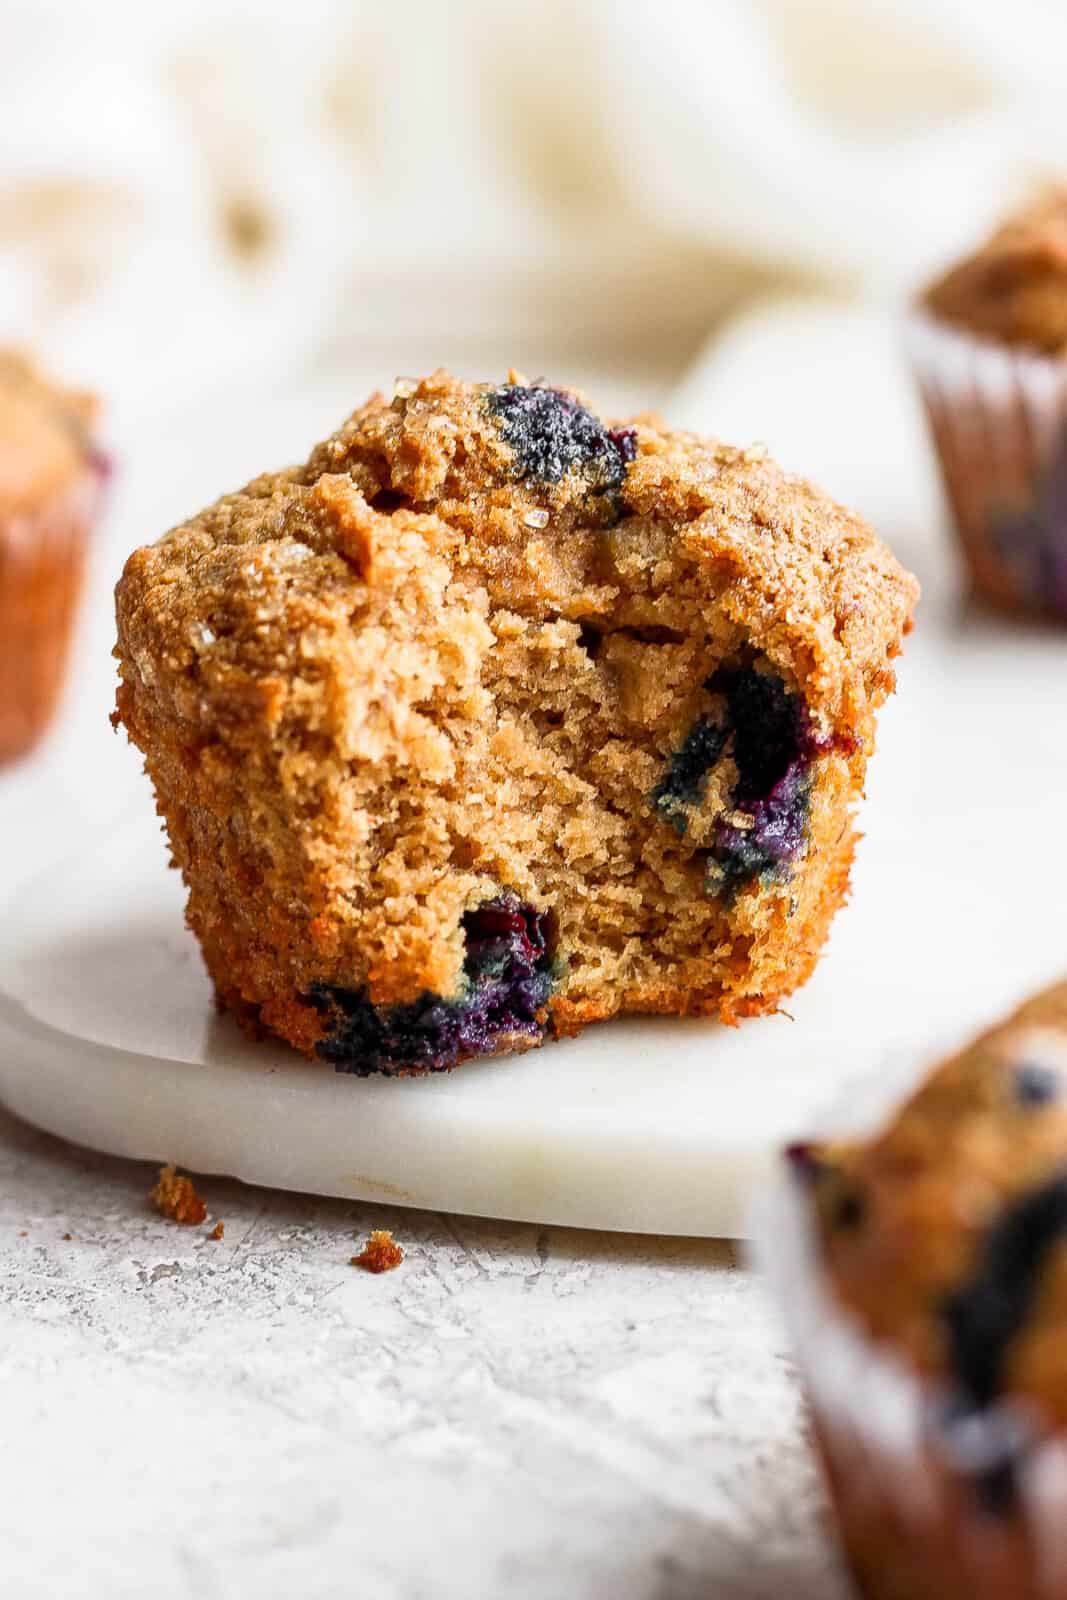 A blueberry banana muffin with a bite taken out.